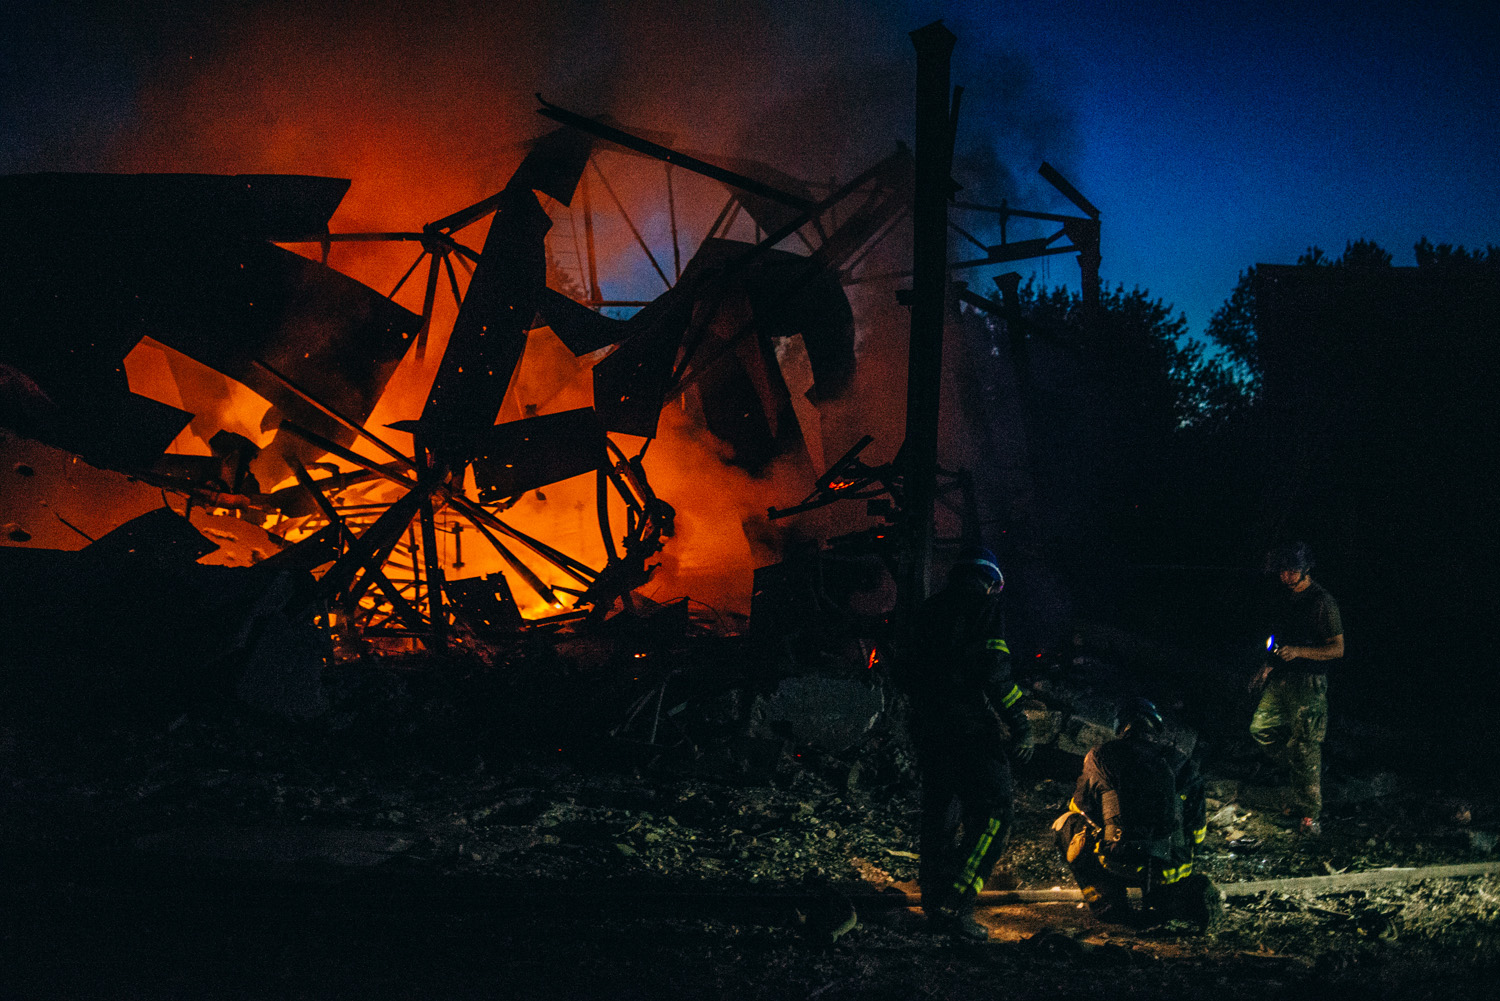 In the image, firefighters are seen at night battling a fierce blaze that engulfs what appears to be a collapsed building in a war zone. The flames illuminate the scene with an intense orange glow against the night sky, while silhouettes of the firefighters are depicted working amidst the destruction, highlighting their courage in the face of danger.